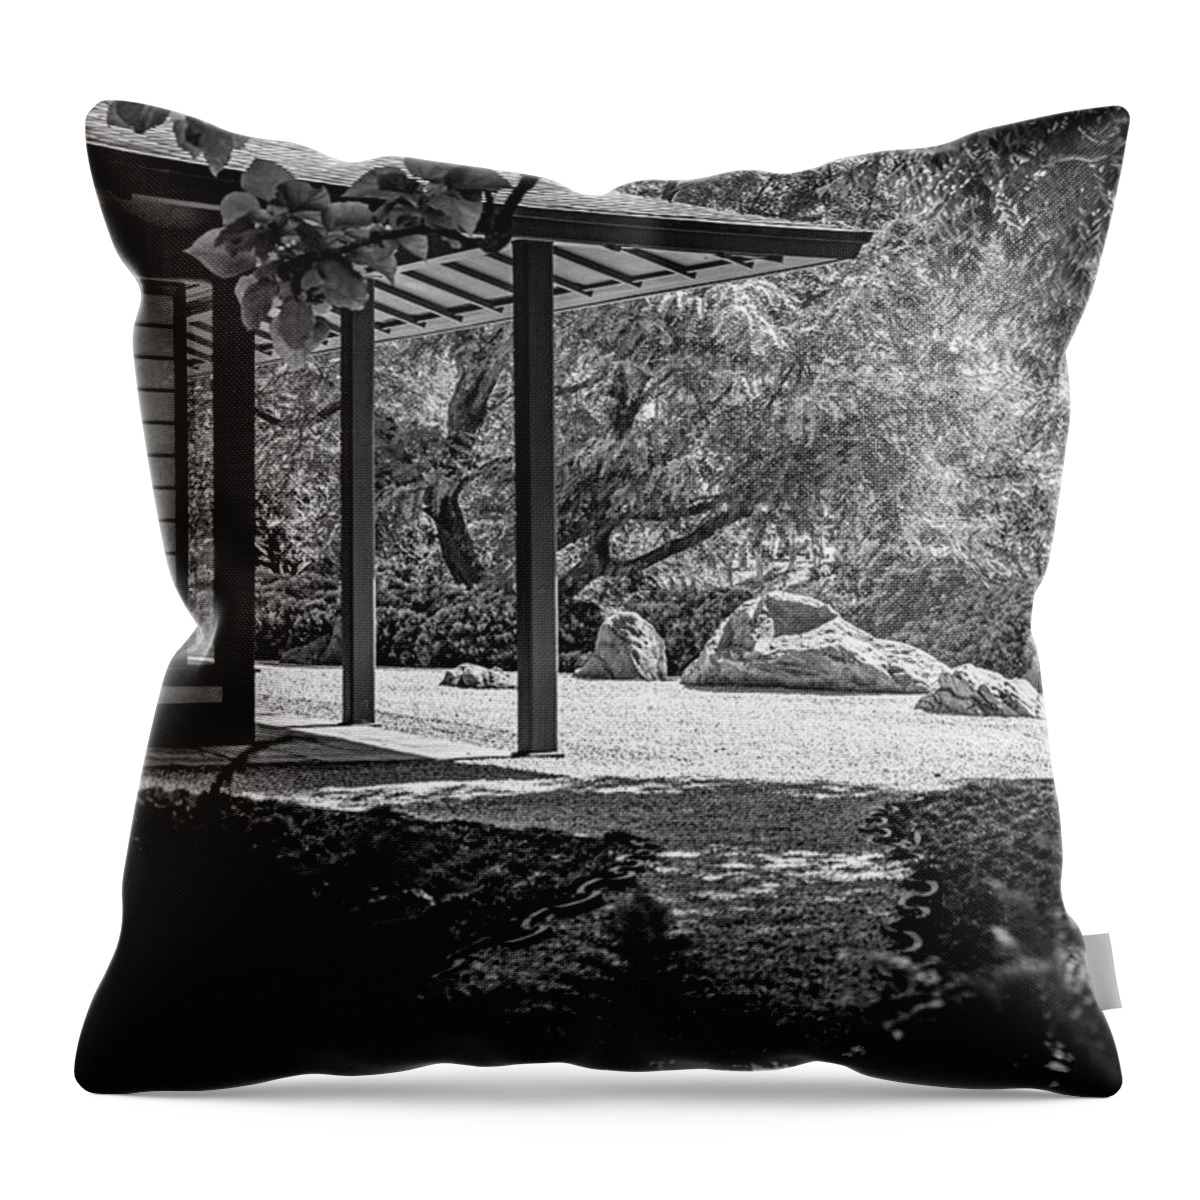 B&w Throw Pillow featuring the photograph Pathway To Serenity by Mike Schaffner